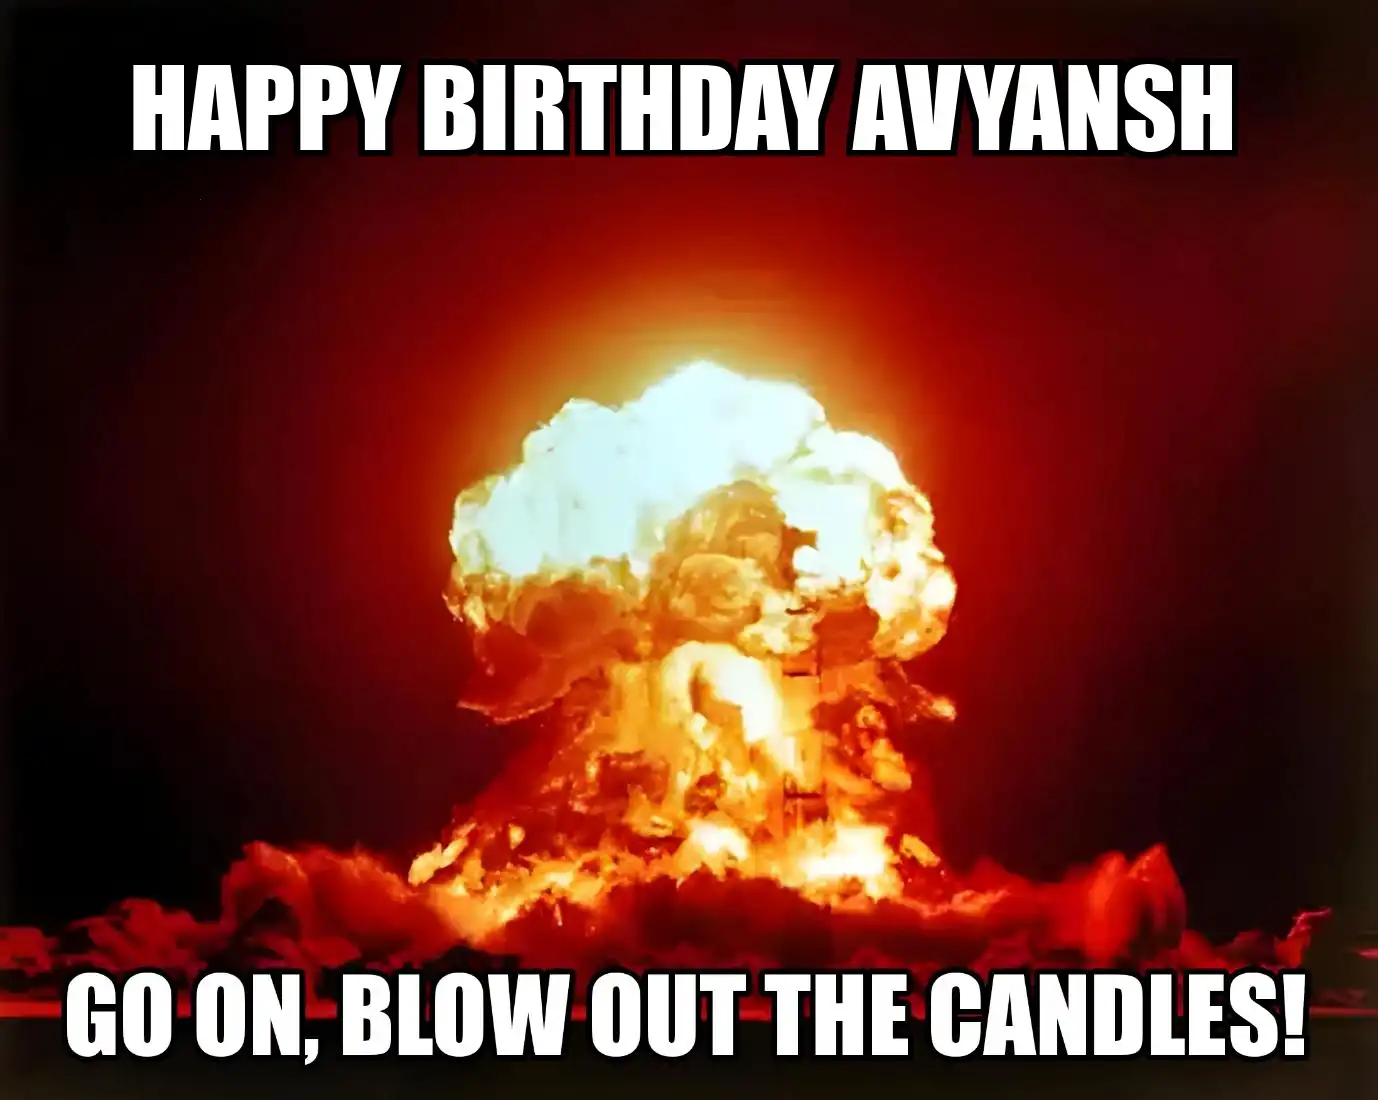 Happy Birthday Avyansh Go On Blow Out The Candles Meme